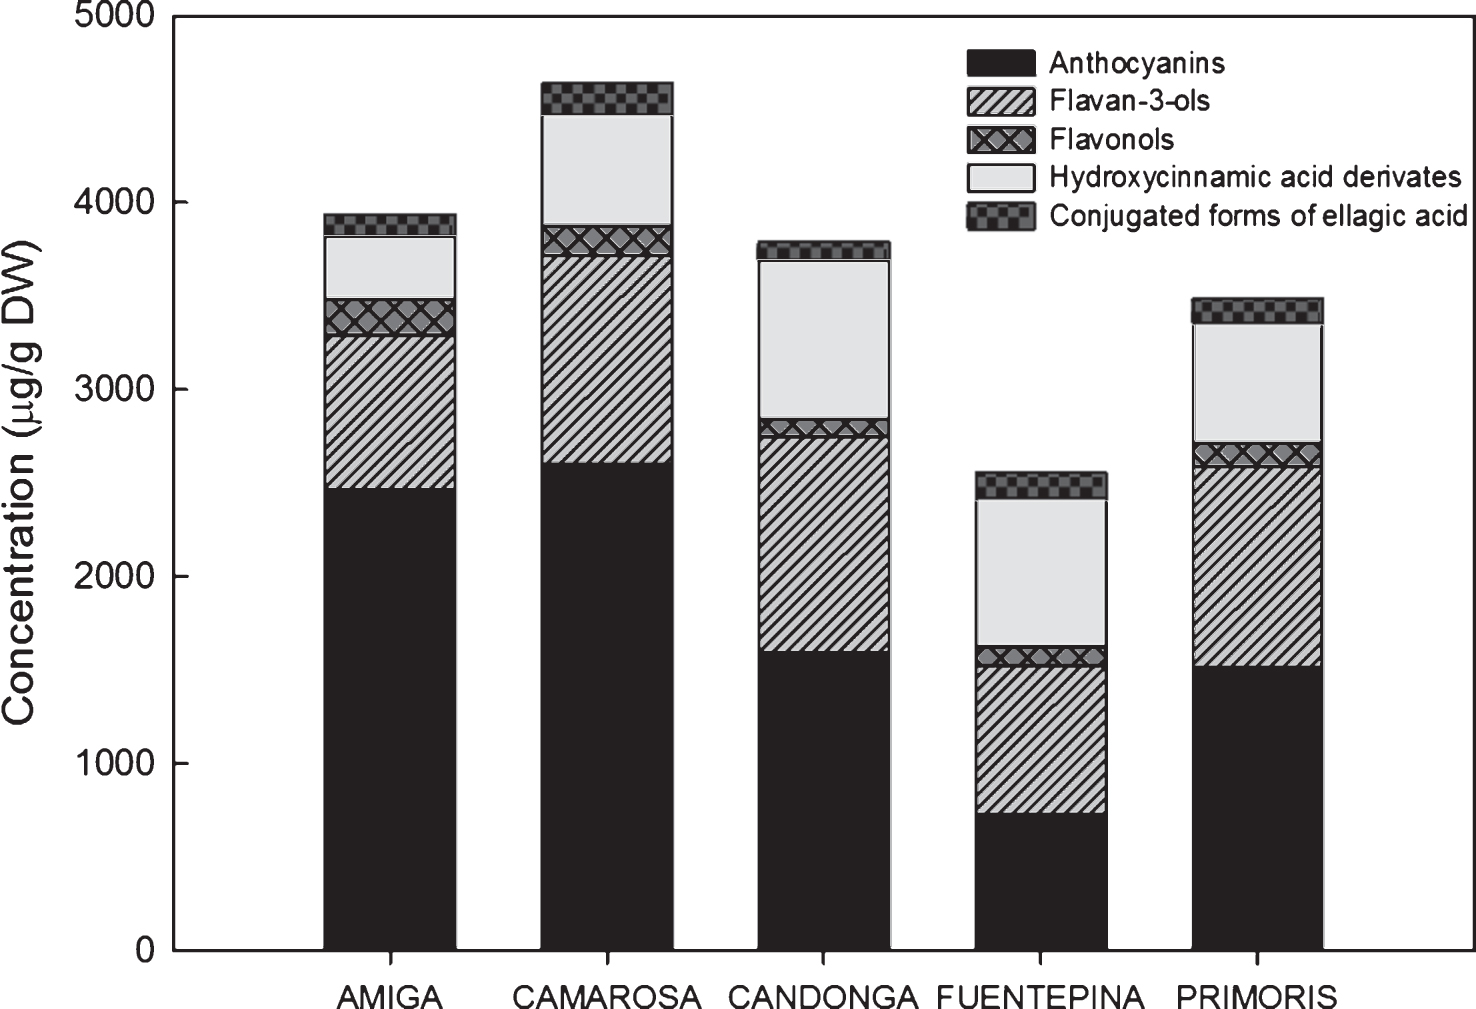 Comparative of concentrations (μg/g DW) of total phenolic compounds (anthocyanins, flavan-3-ols, flavonols, hydroxycinnamic acid derivates and conjugated forms of ellagic acid) in different strawberry cultivars. Data are an average of years (2010 and 2011) and stages of ripening (nearly ripe and ripe).